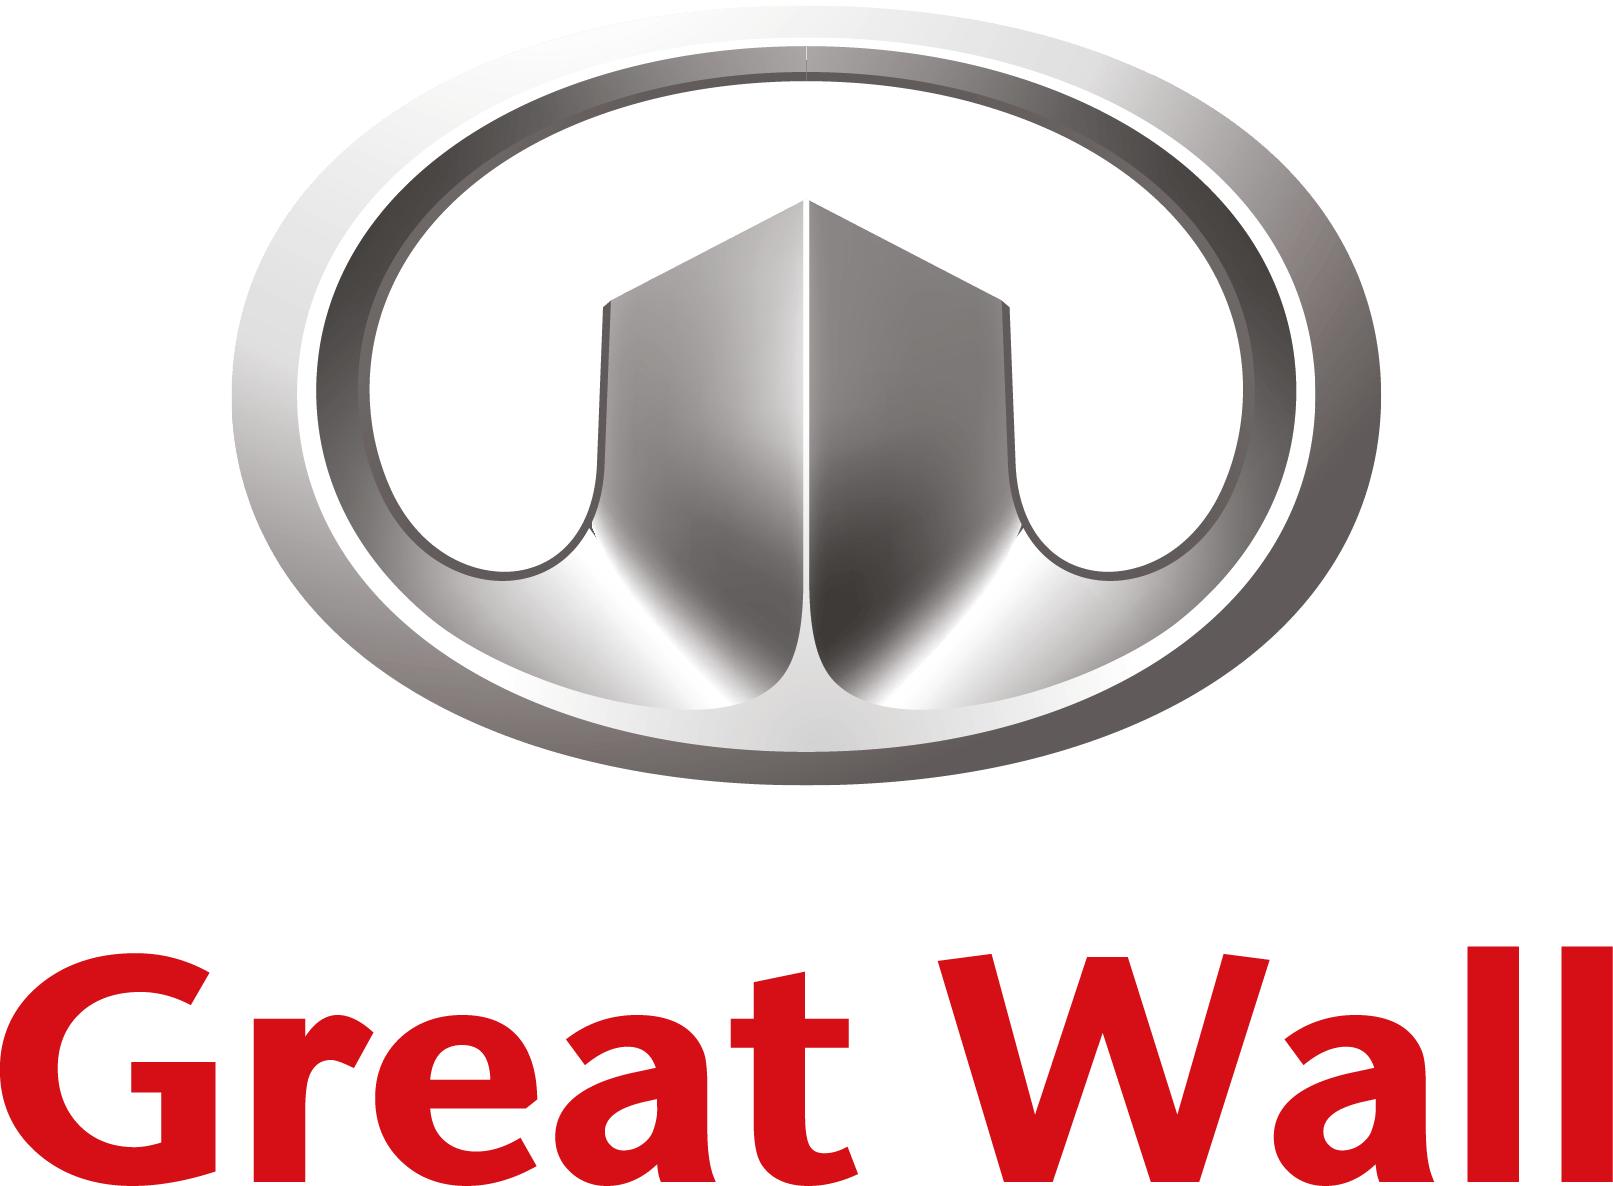 Great Title the Walls Logo - Great wall logo png 3 » PNG Image